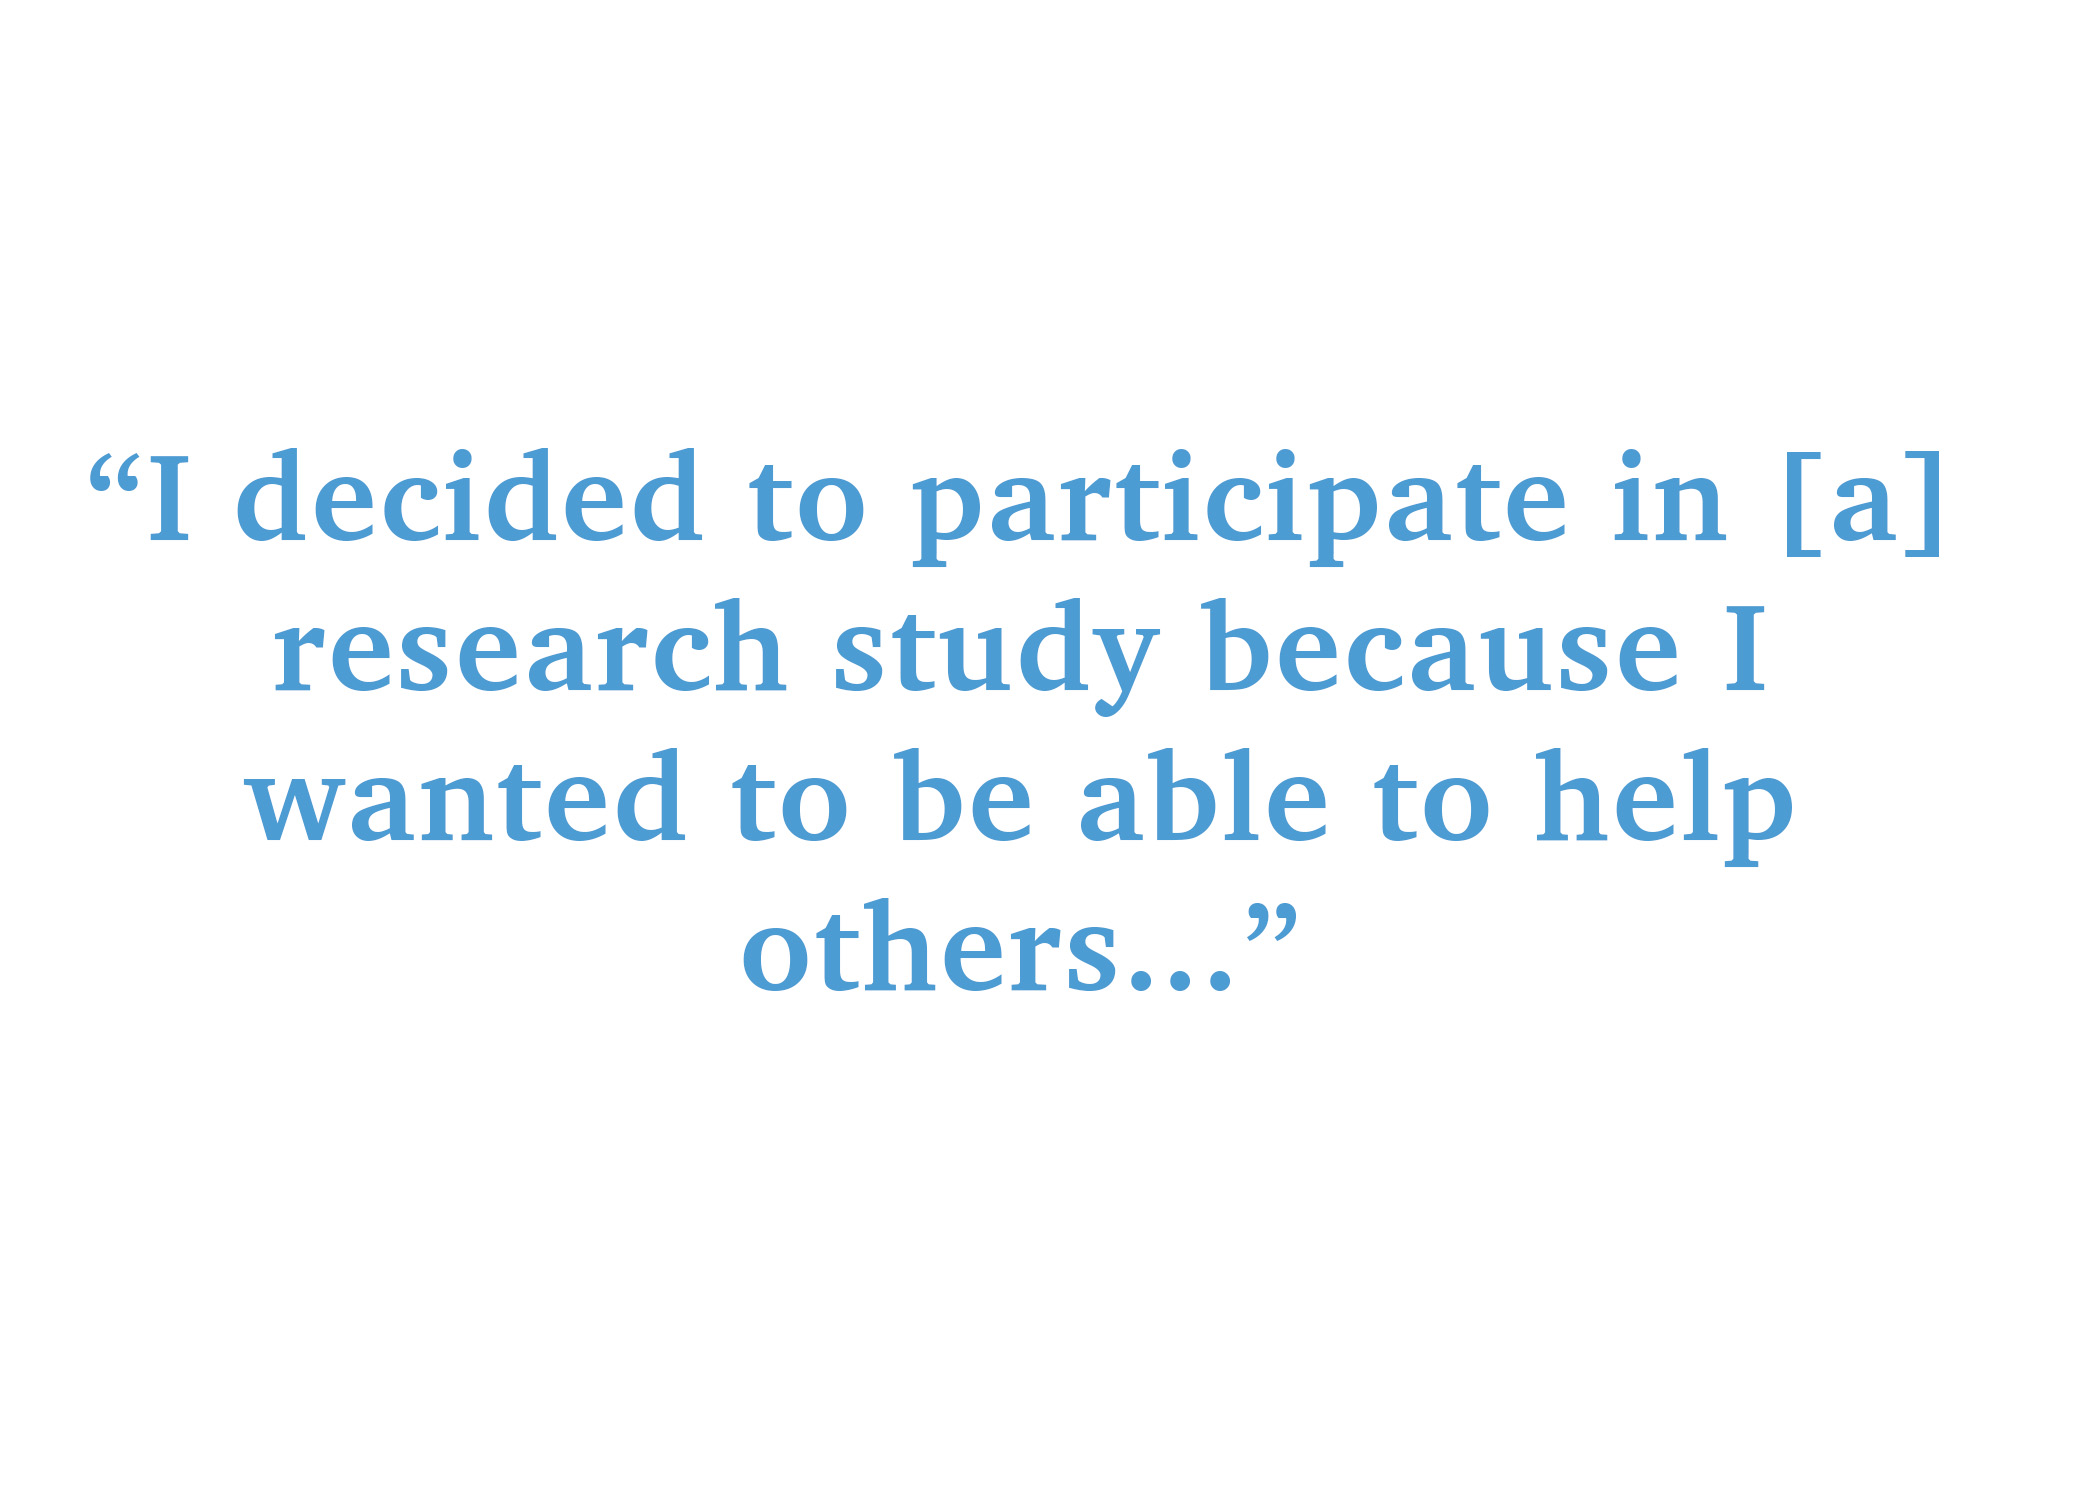 3.	“I decided to participate in [a] research study because I wanted to be able to help others."